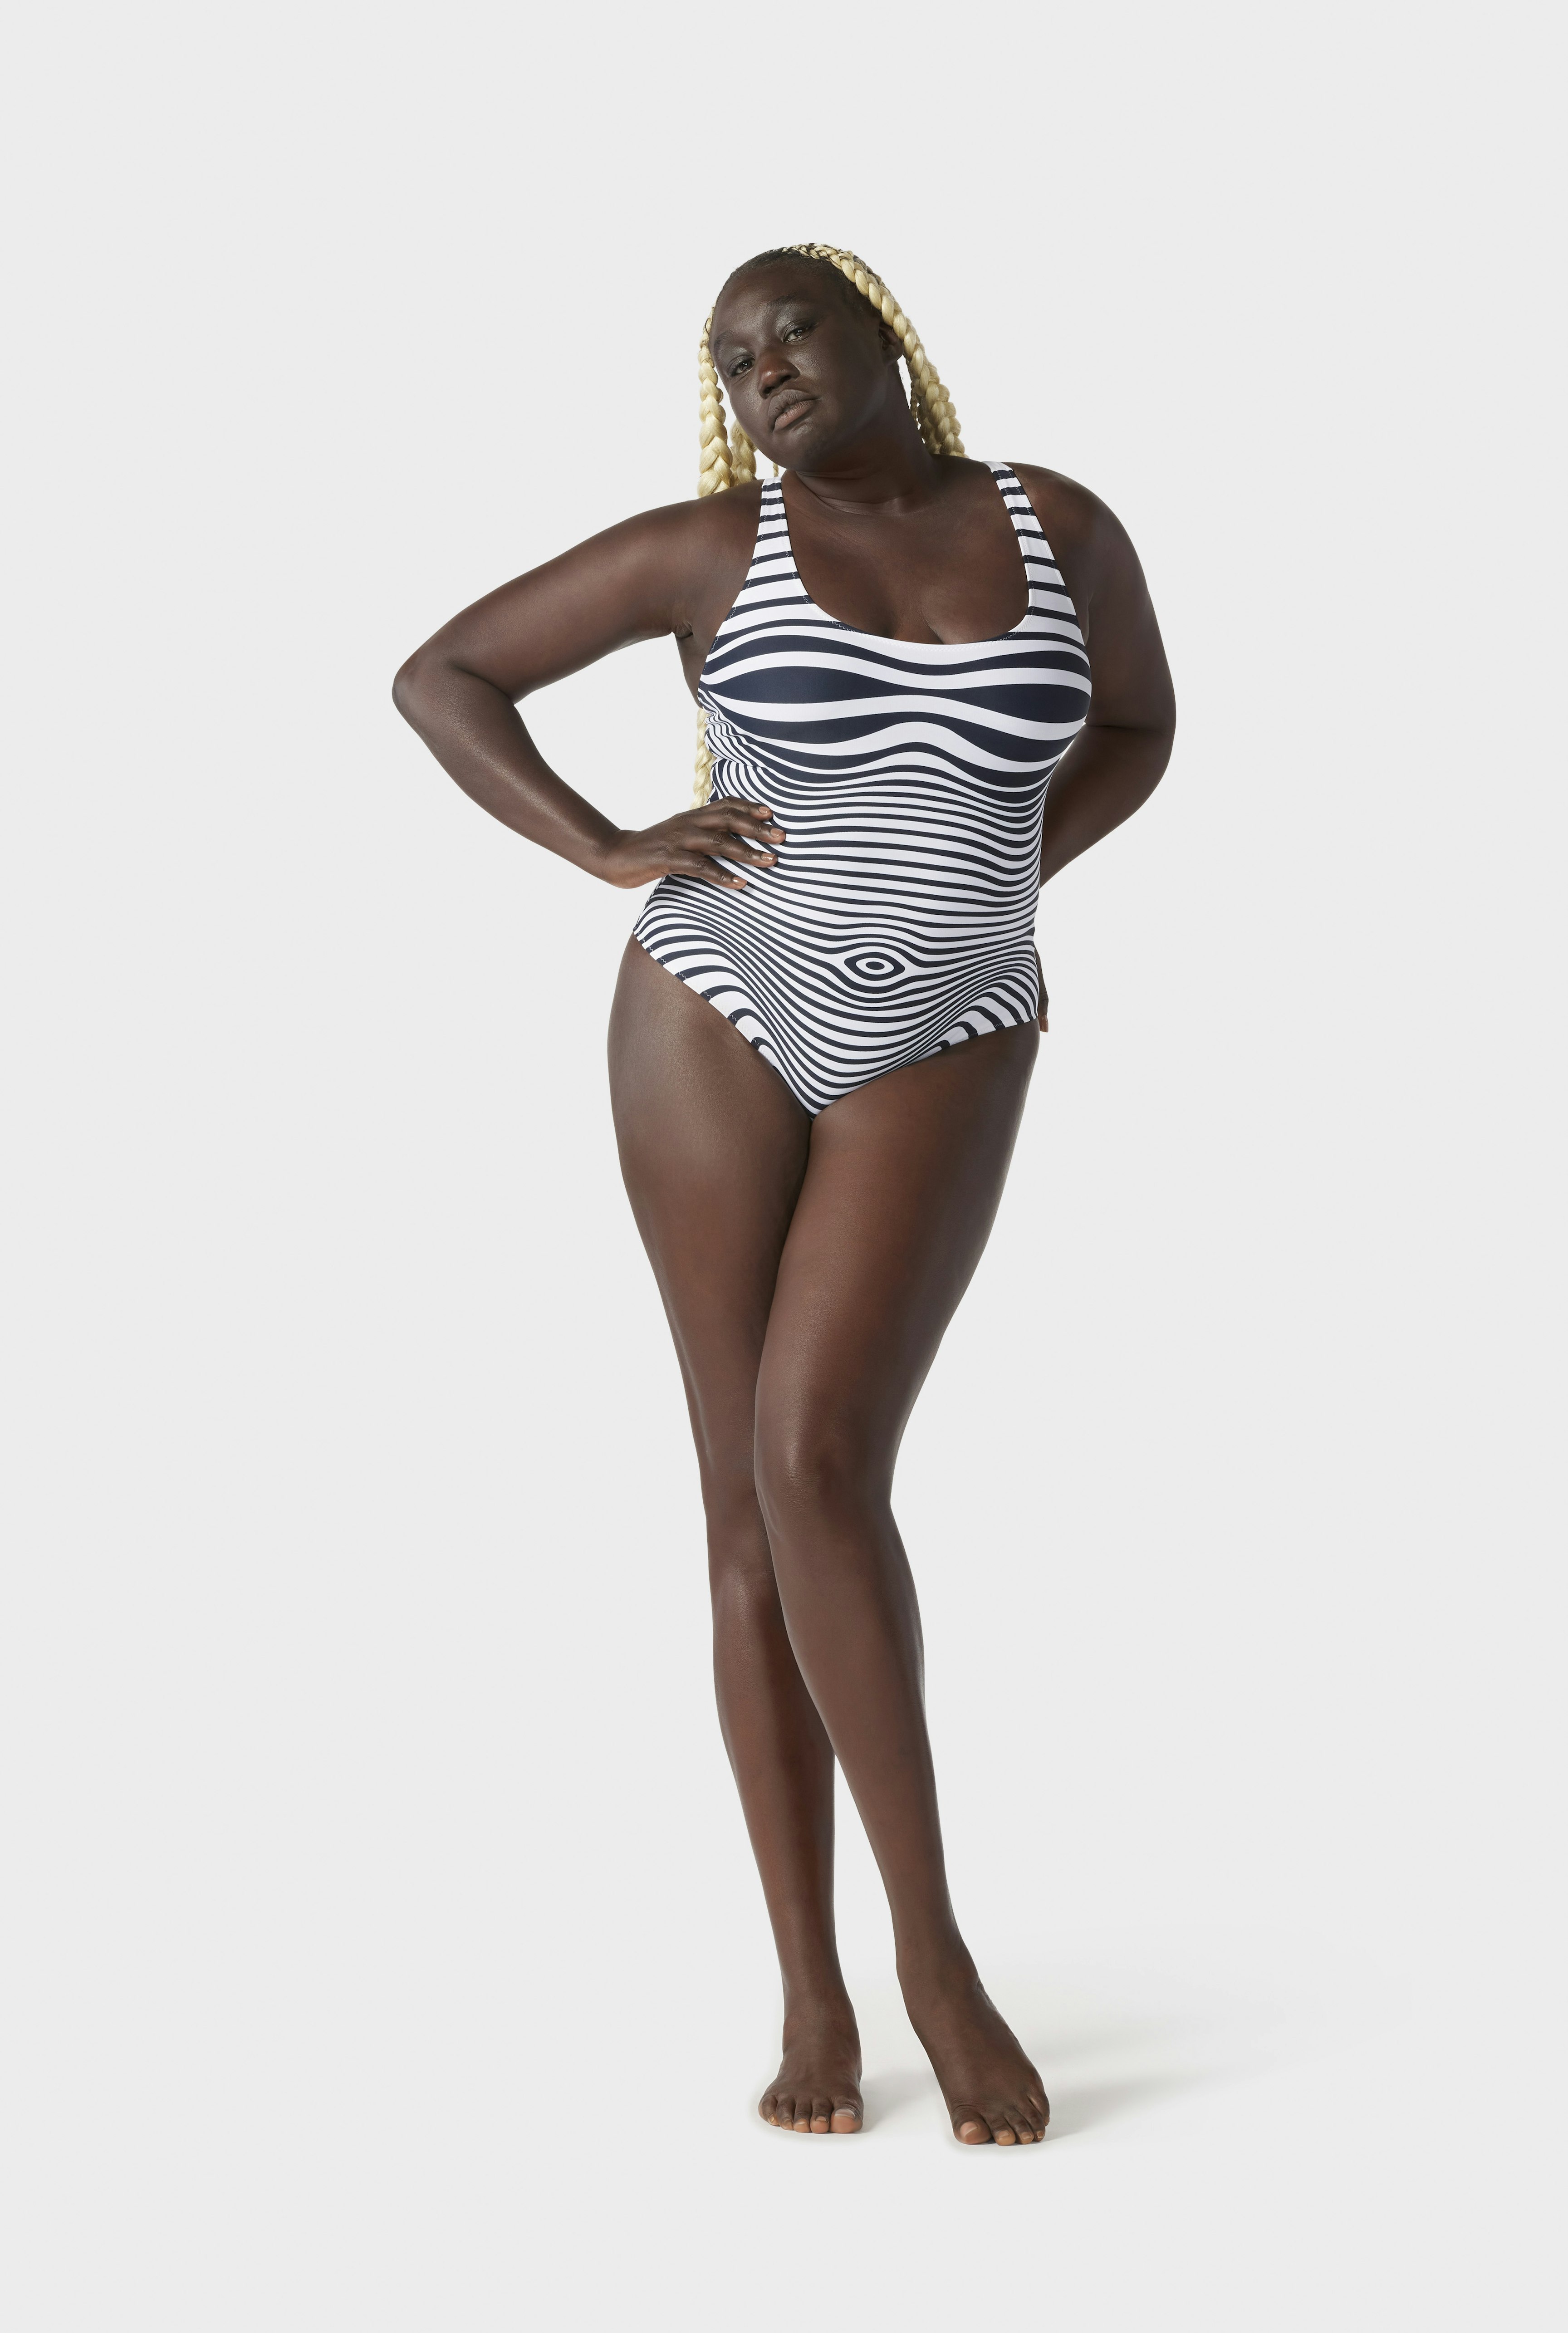 The Navy Blue Body Morphing Swimsuit